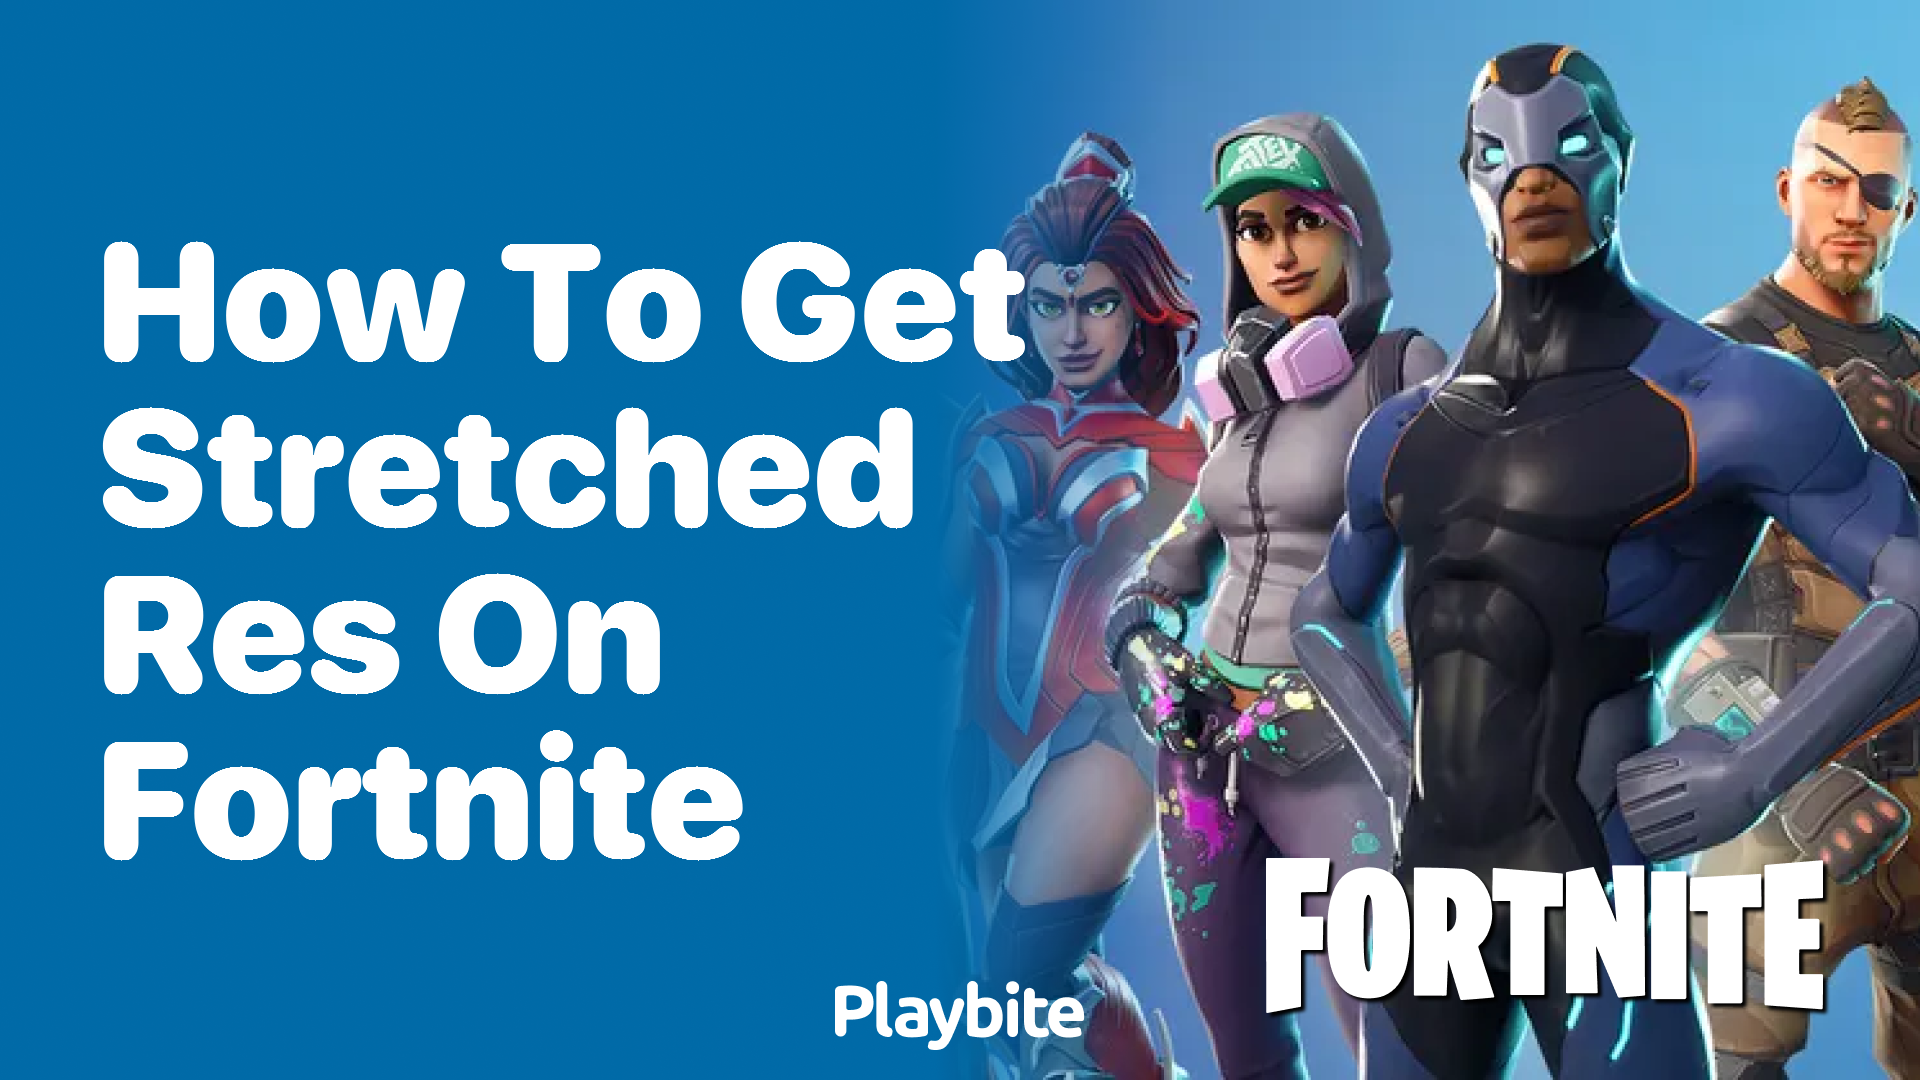 Defaulting 🐡 on X: Man when I get home I love to see my Fortnite